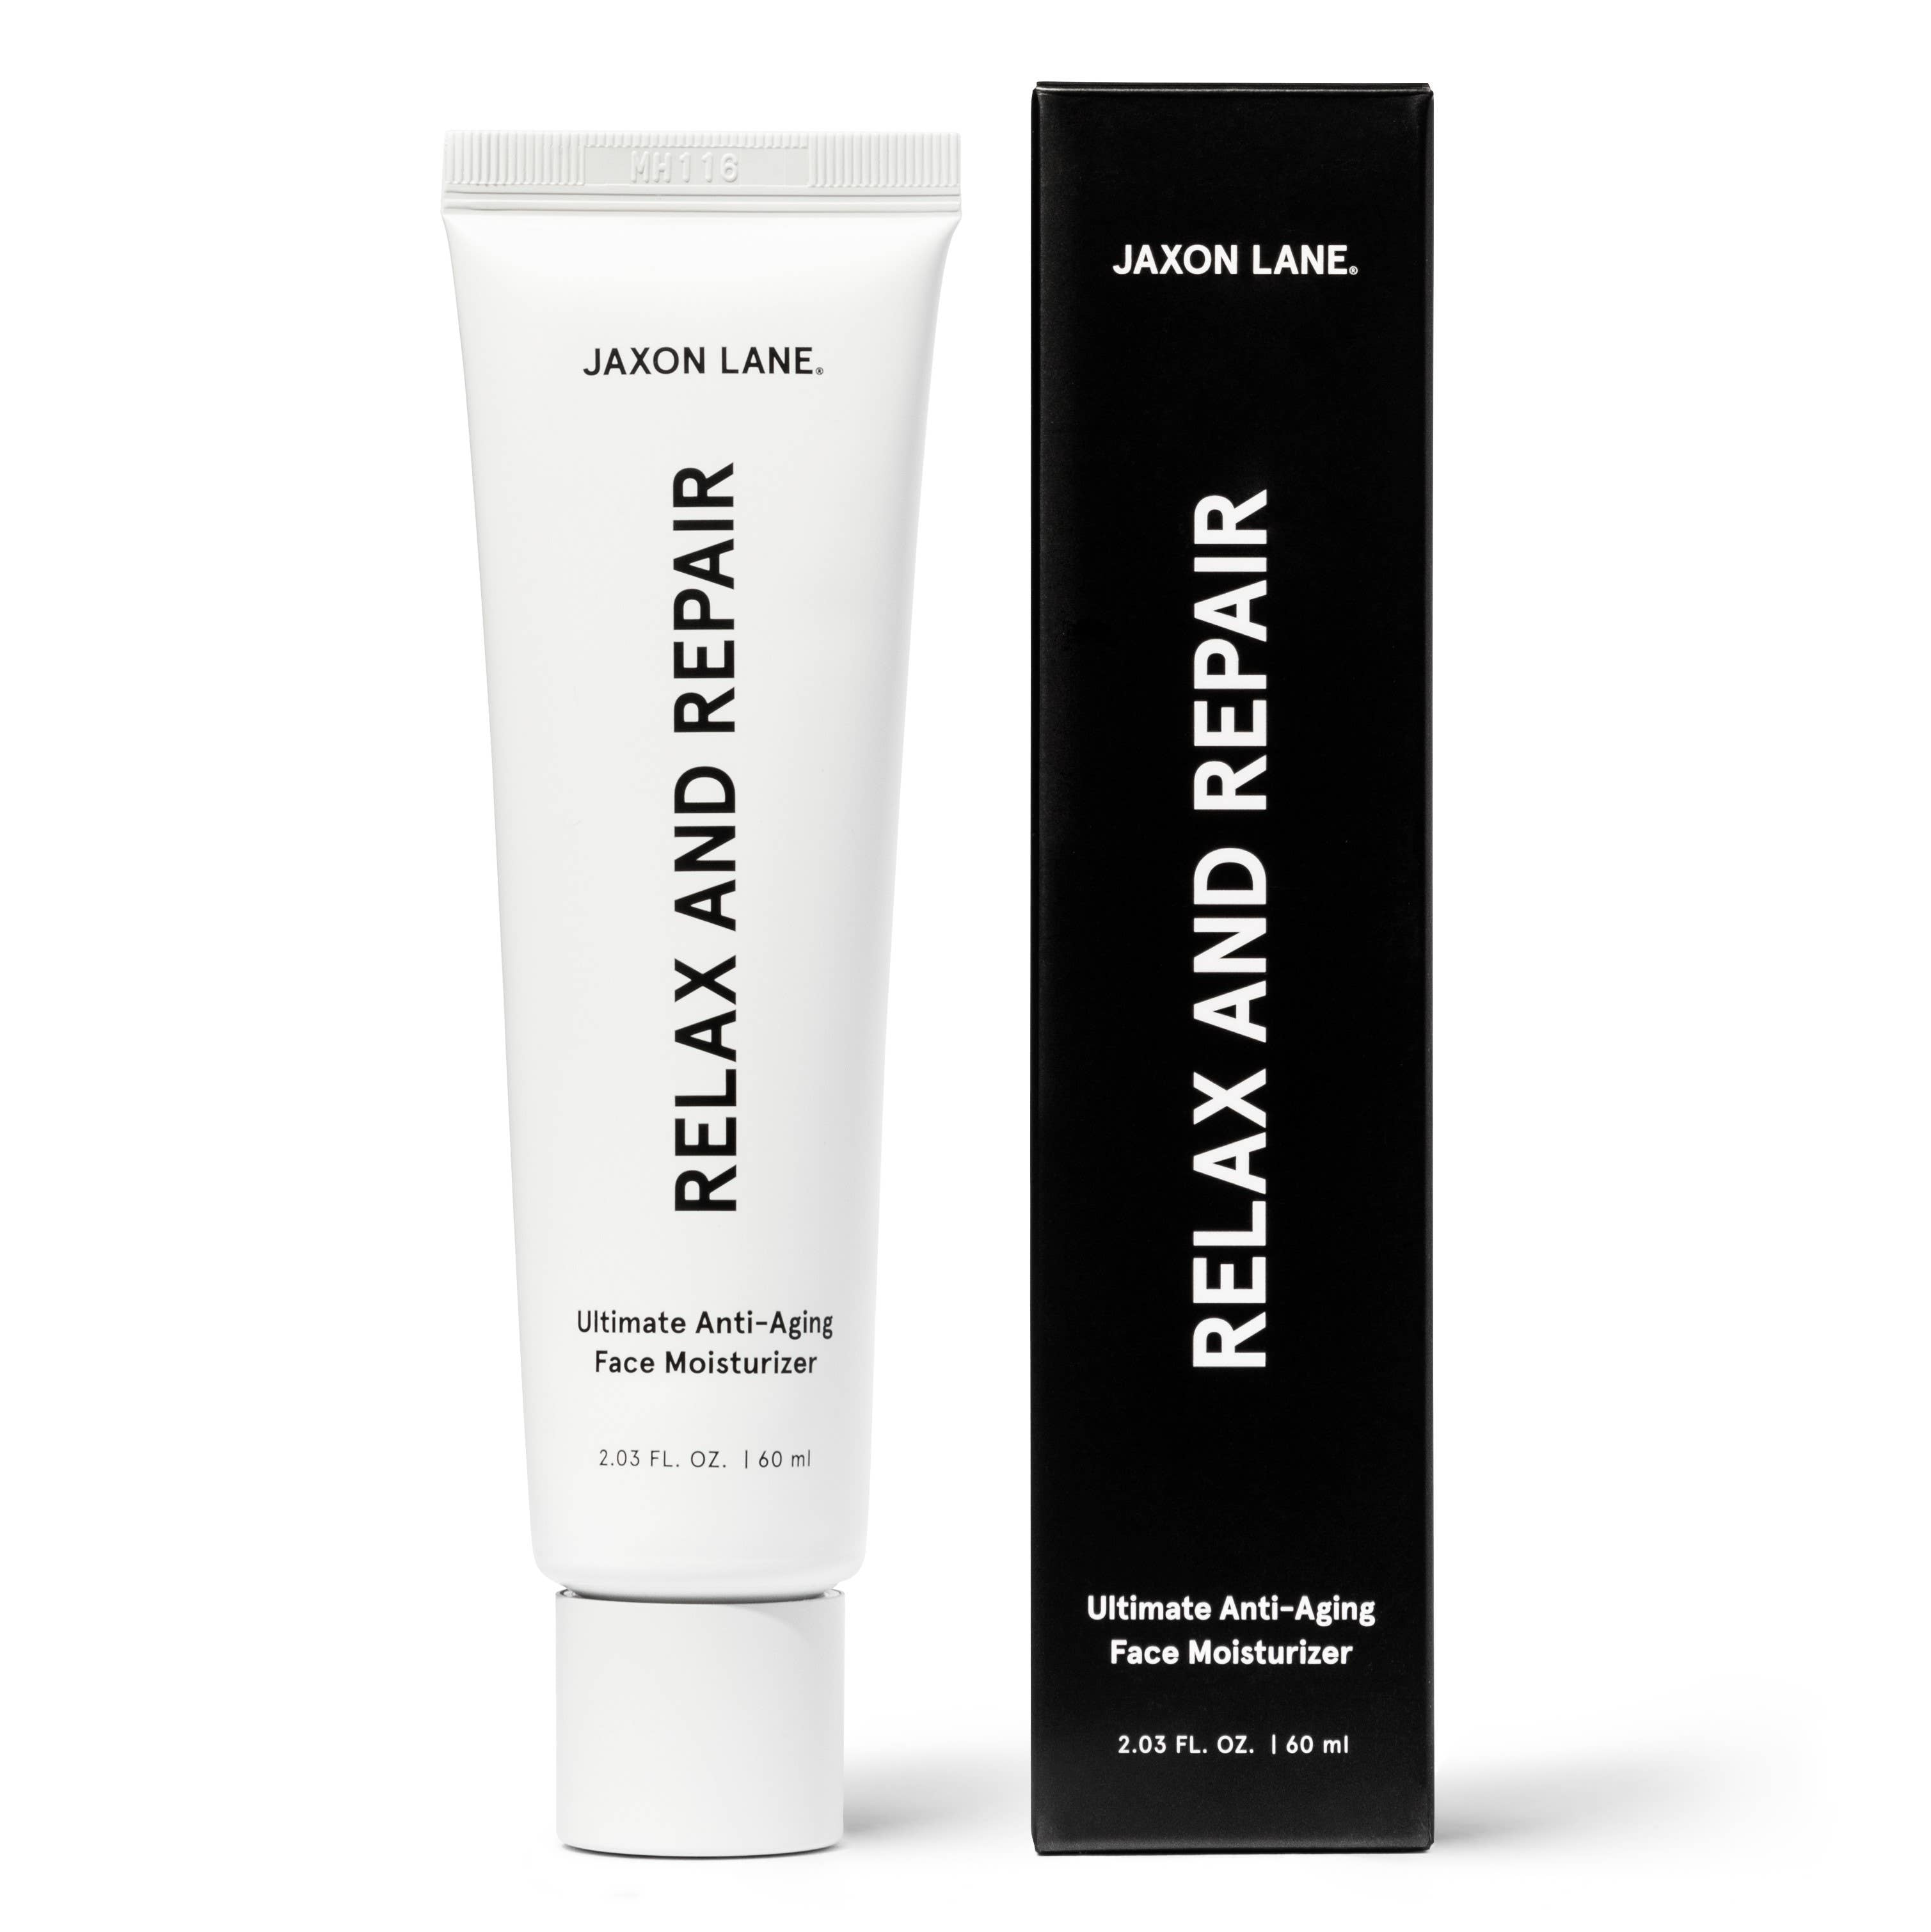 RELAX AND REPAIR - Ultimate Anti-Aging Face Moisturizer by JAXON LANE